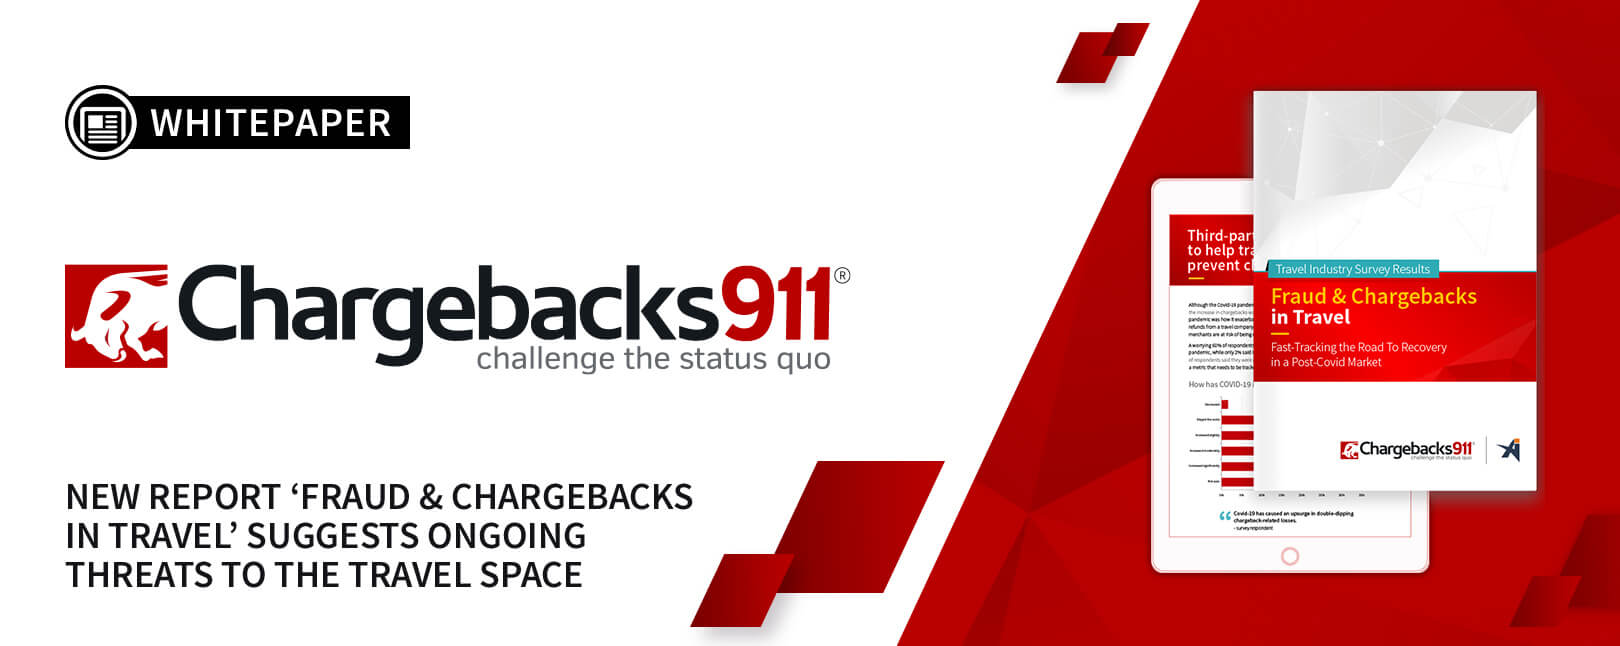 New Report from Chargebacks911® Finds Trouble for Travel Merchants